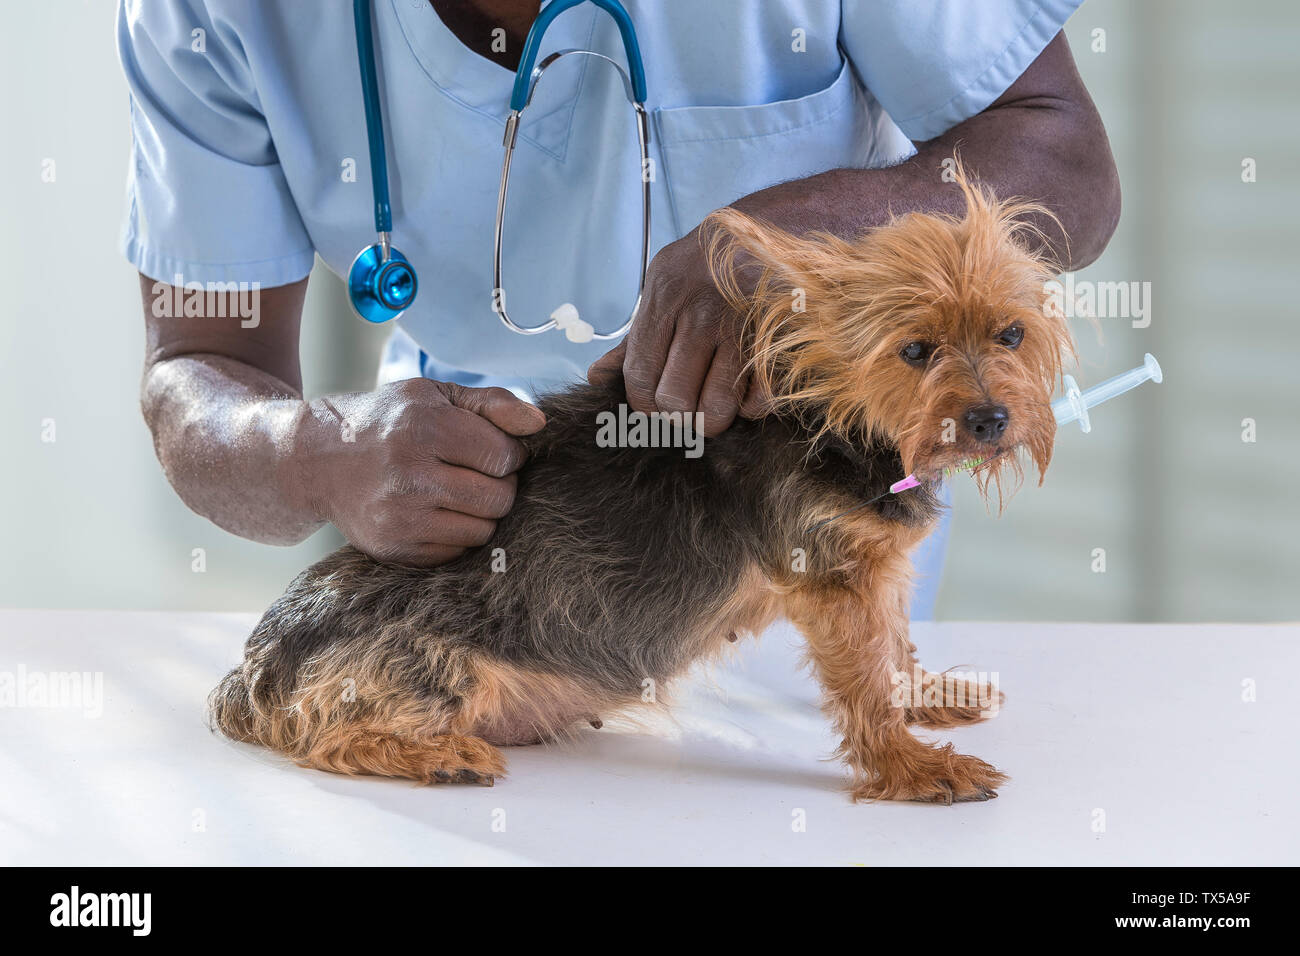 Veterinarian with pet 's health checked on yorshire 's holding a syringue in his mouth, on veterinarian clinic background. Stock Photo